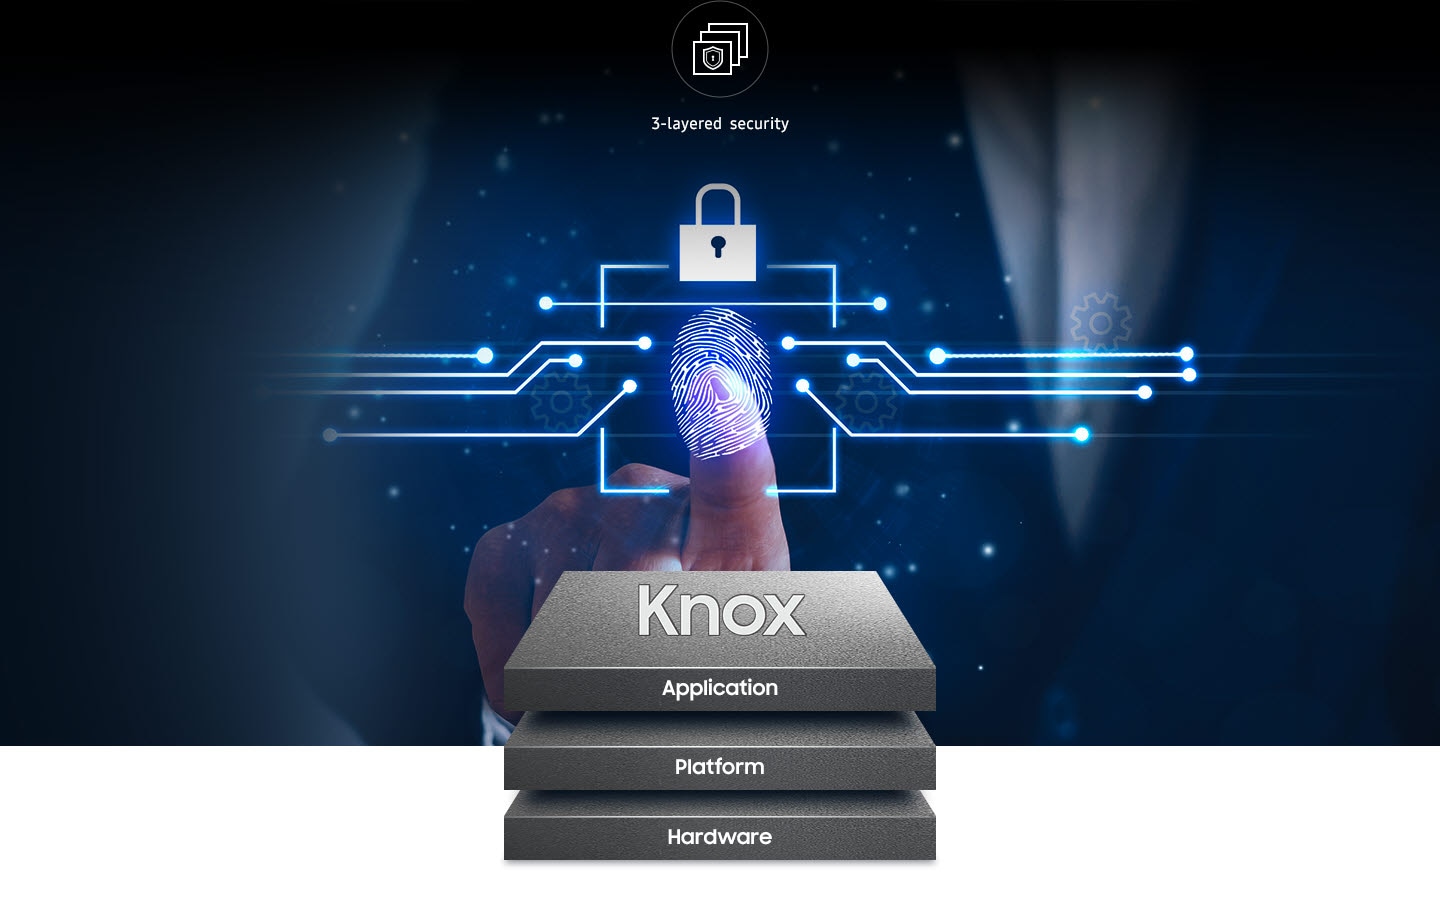 Below the fingerprint authentication, there is a 3-layered security structure consisting of KNOX's Application, Platform, and Hardware.